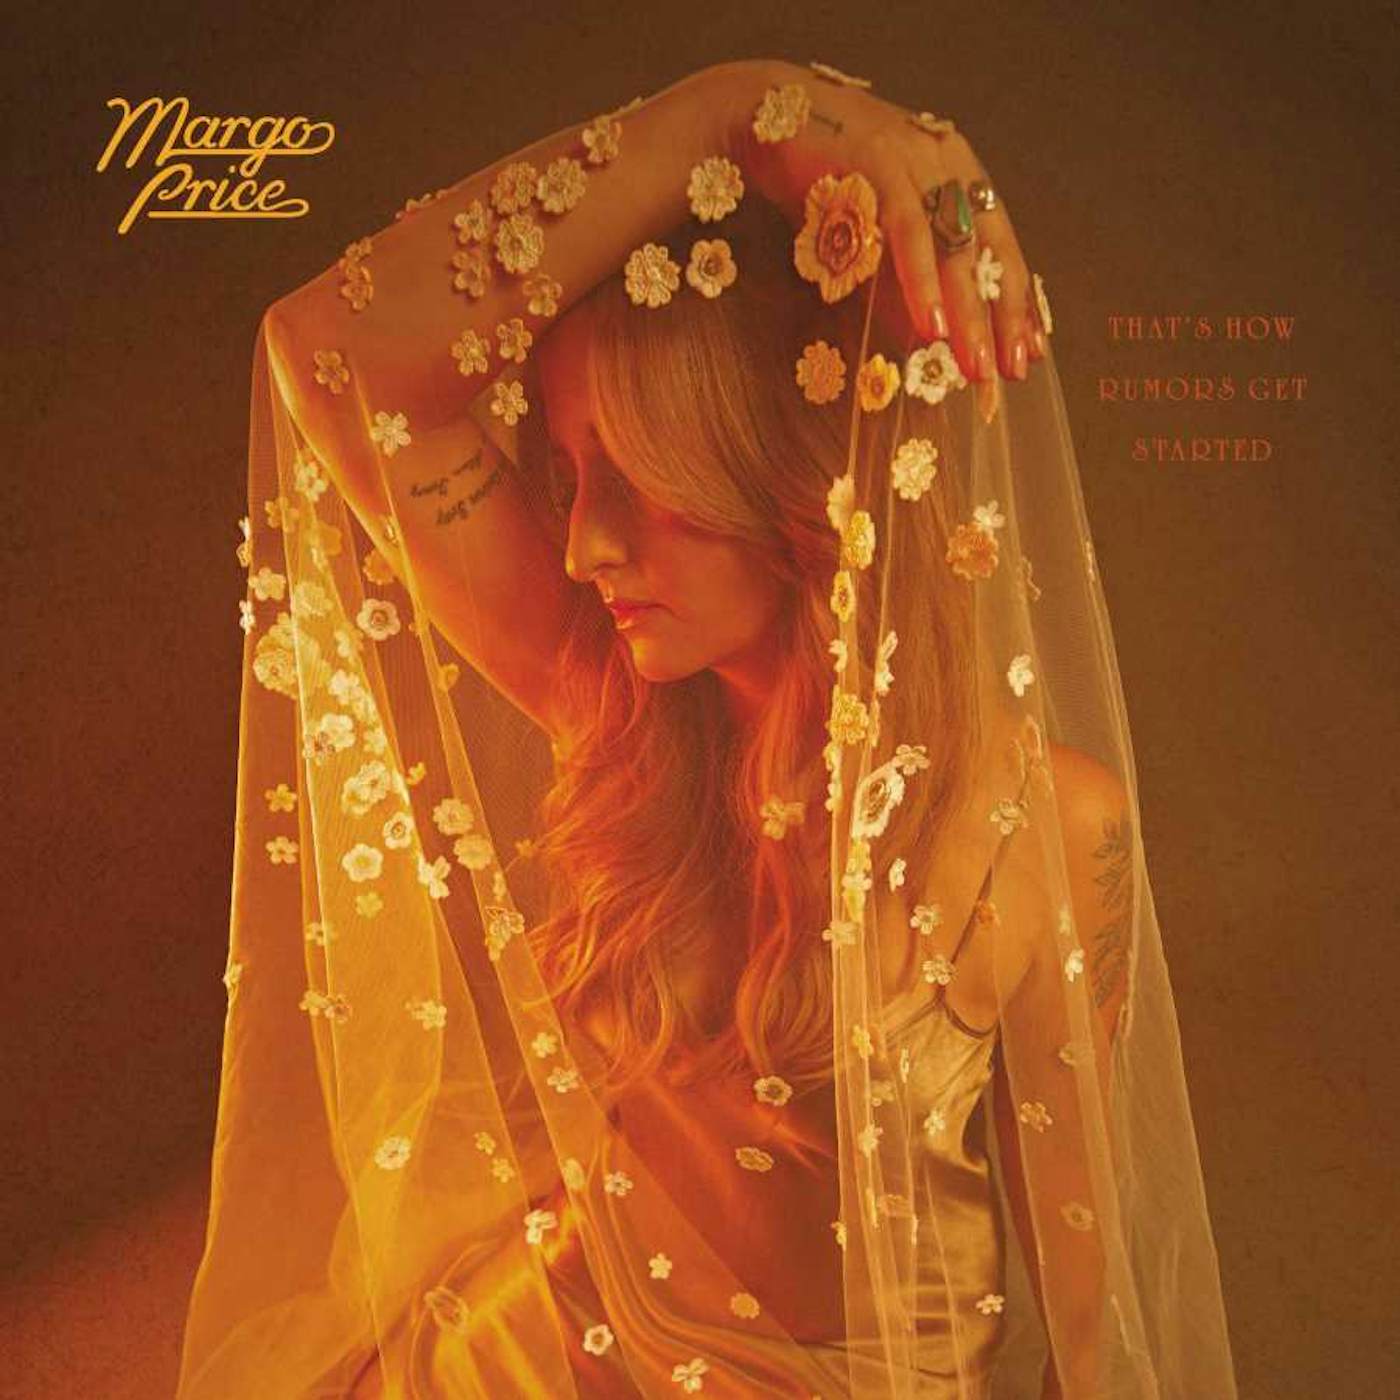 Margo Price THAT'S HOW RUMORS GET STARTED CD